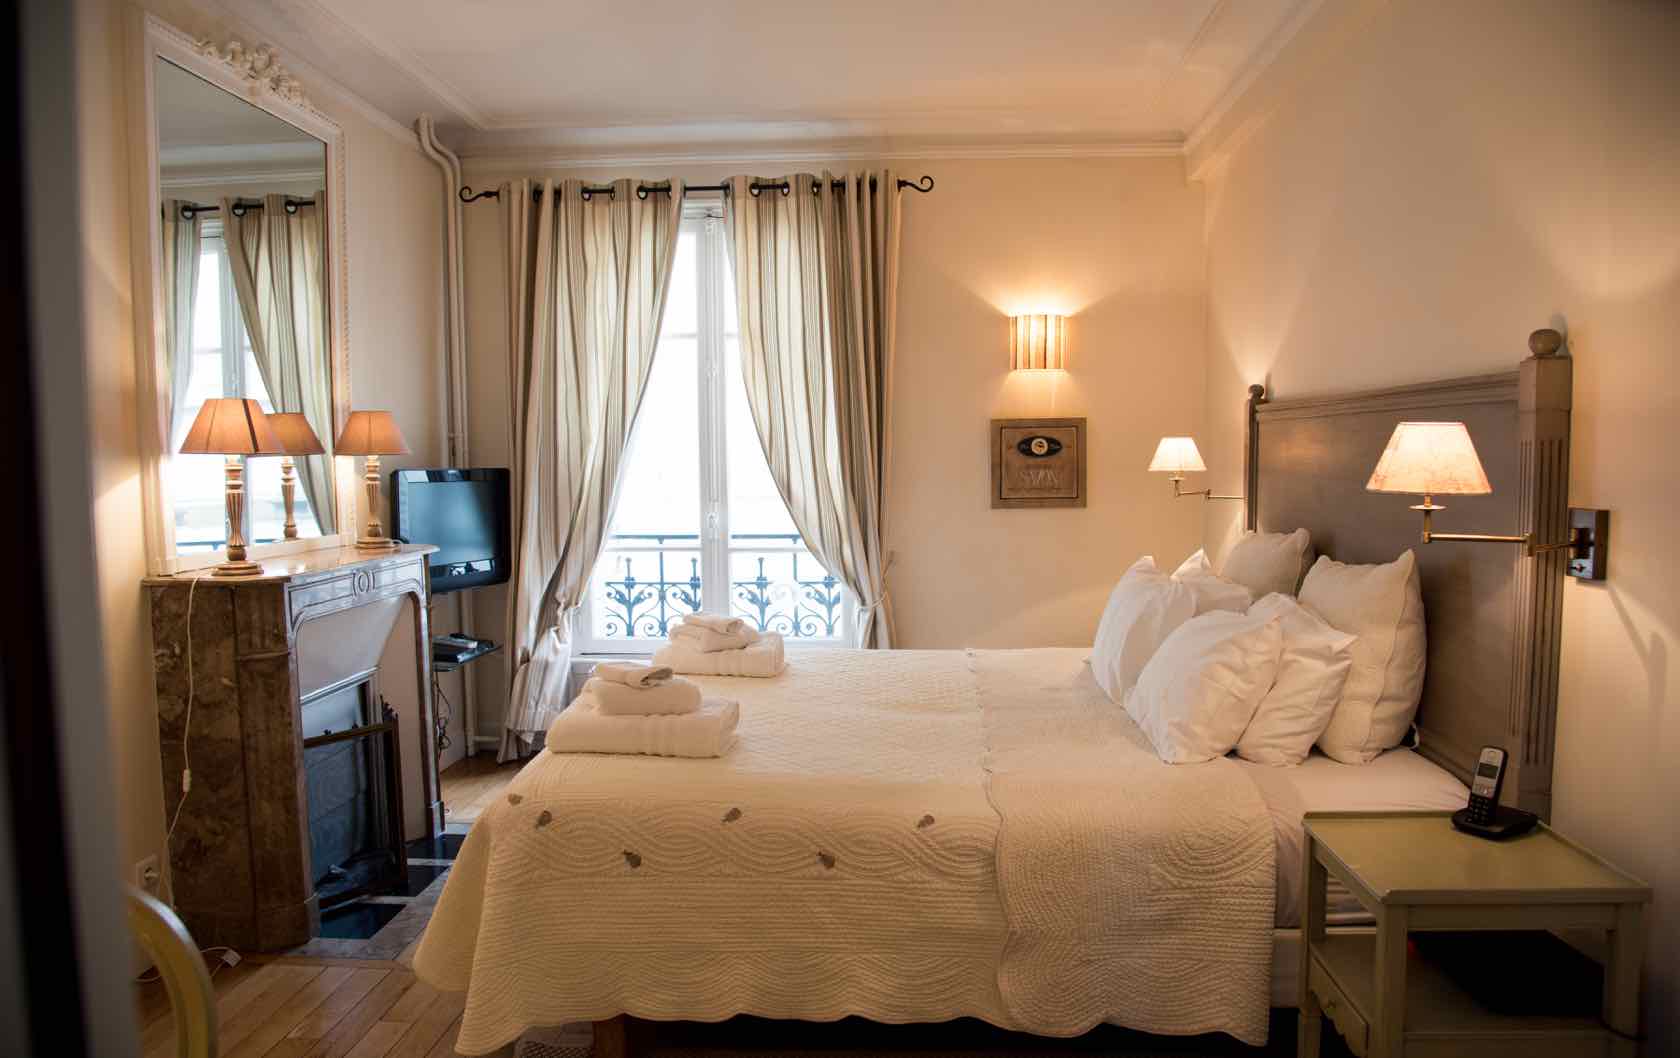 Warm and Cozy Apartments in Paris for Fall and Winter Stays - Paris Perfect